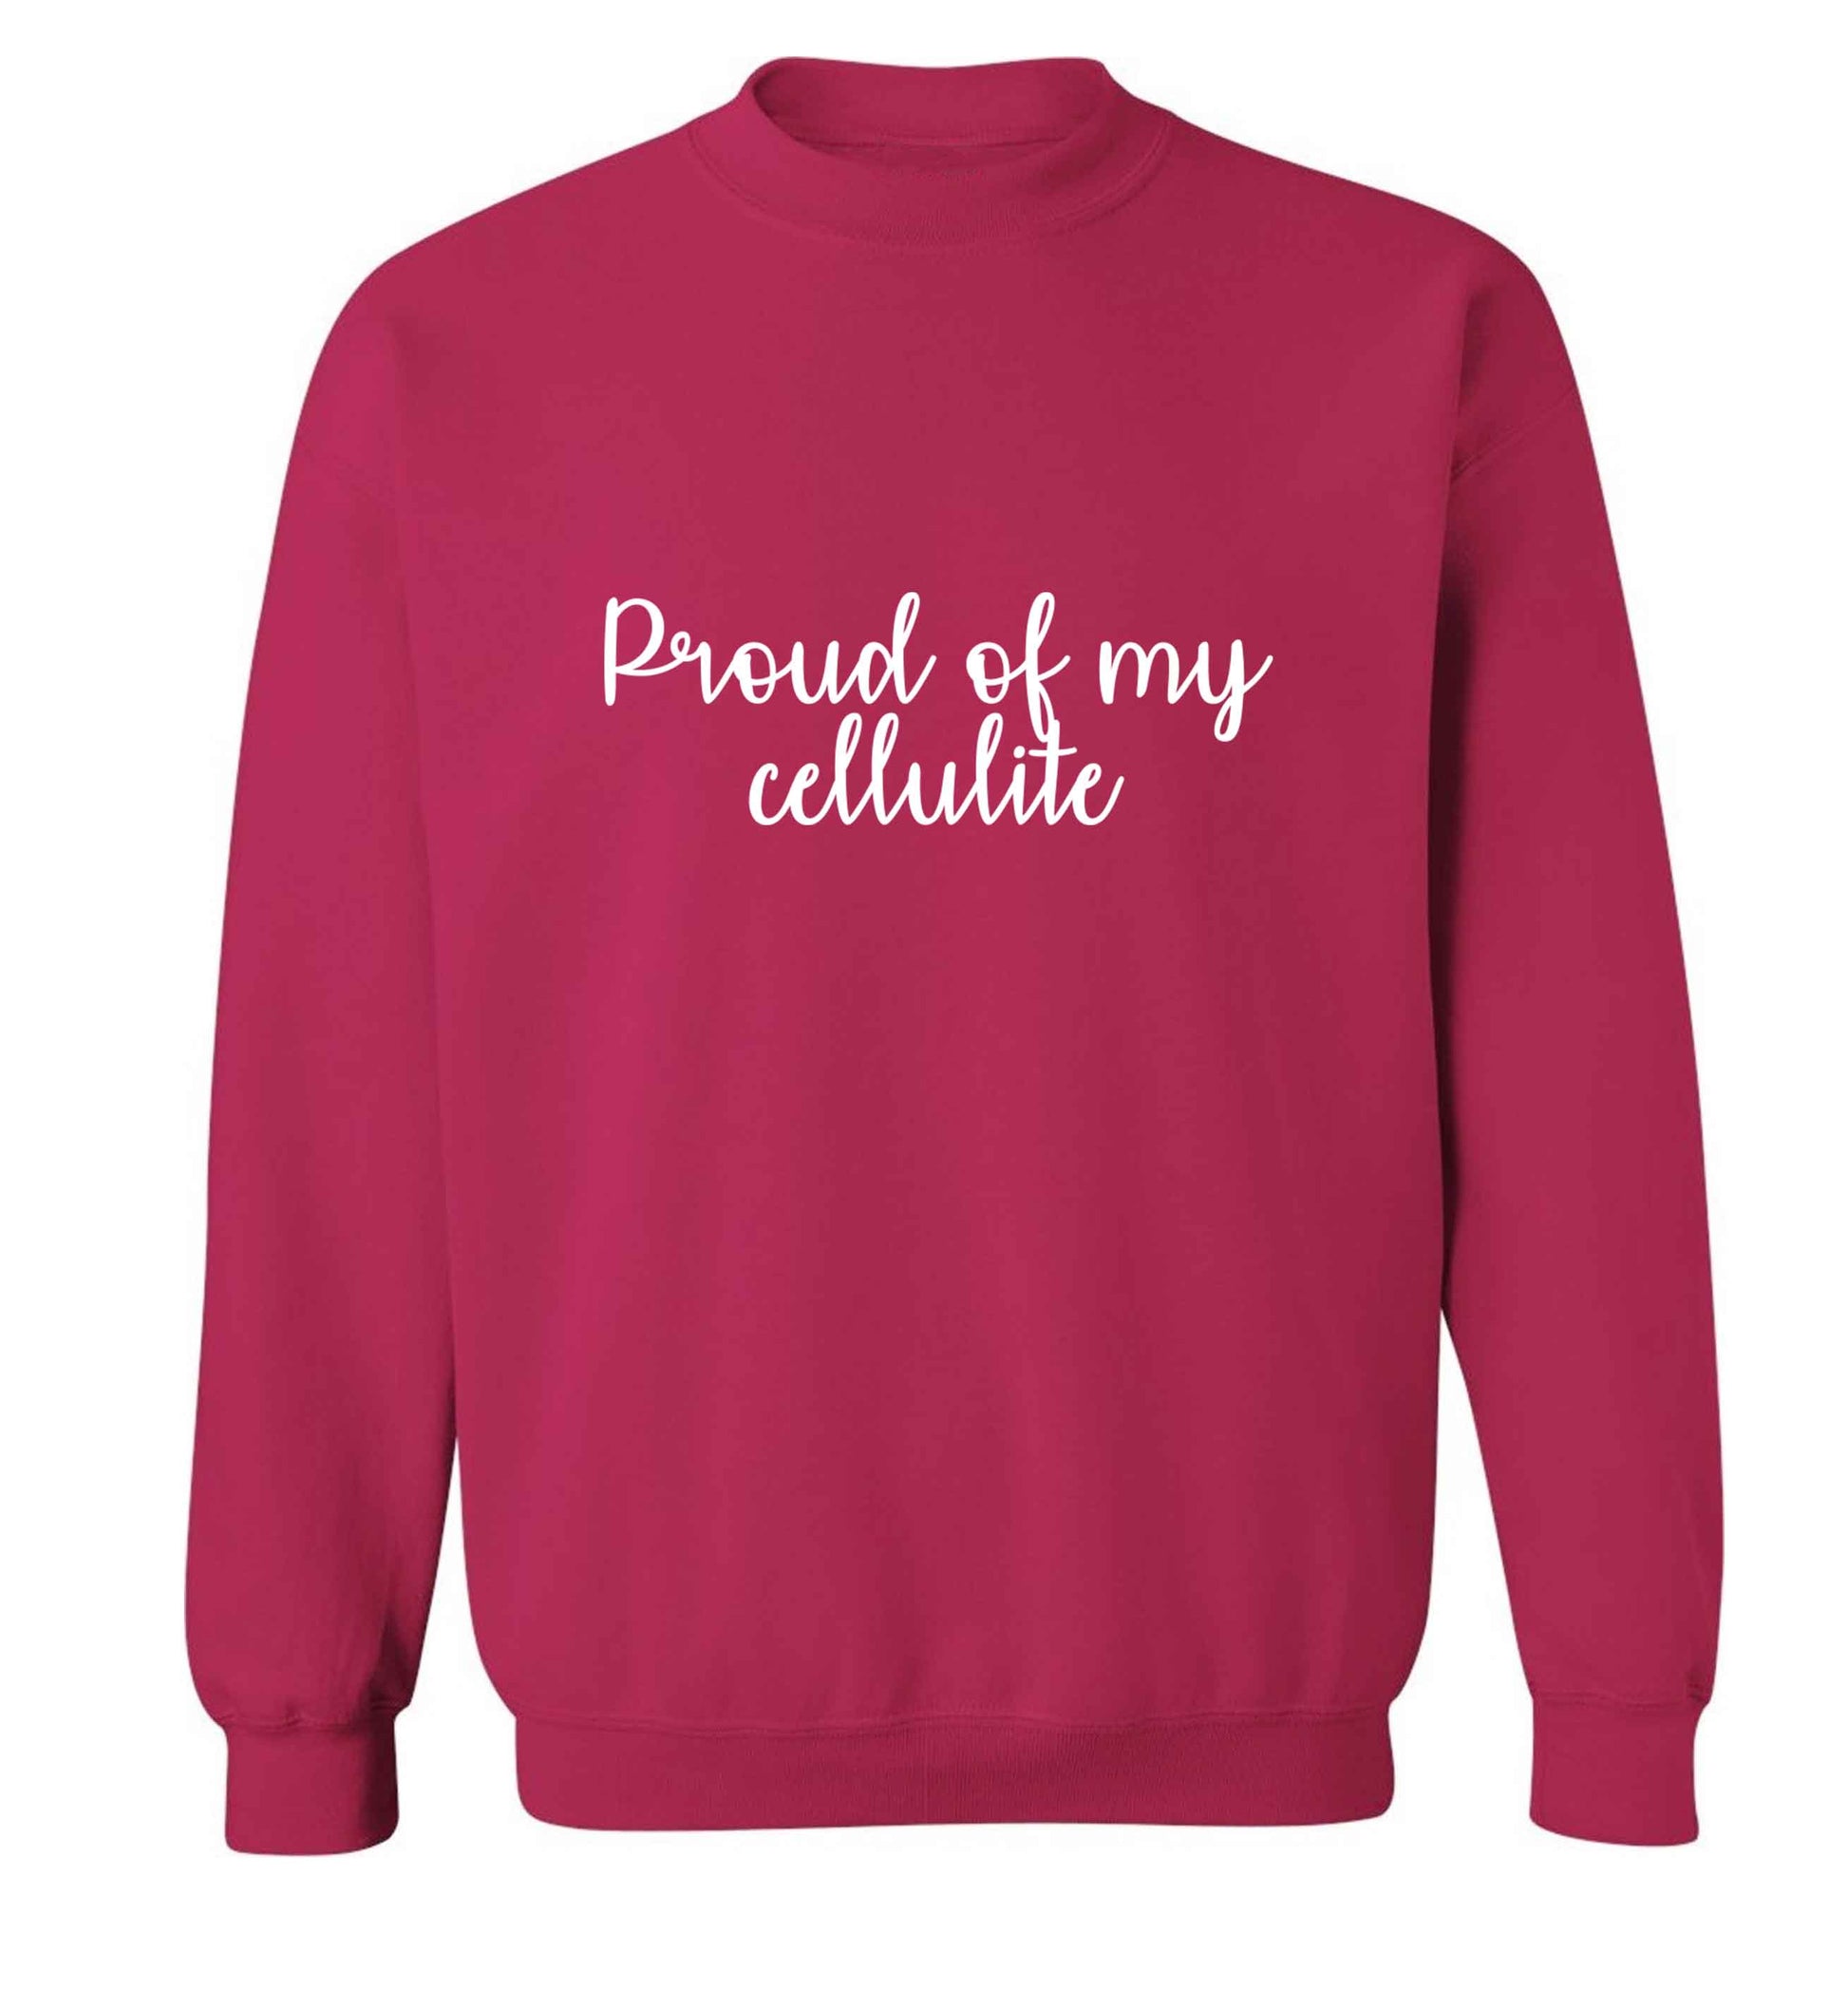 Proud of my cellulite adult's unisex pink sweater 2XL